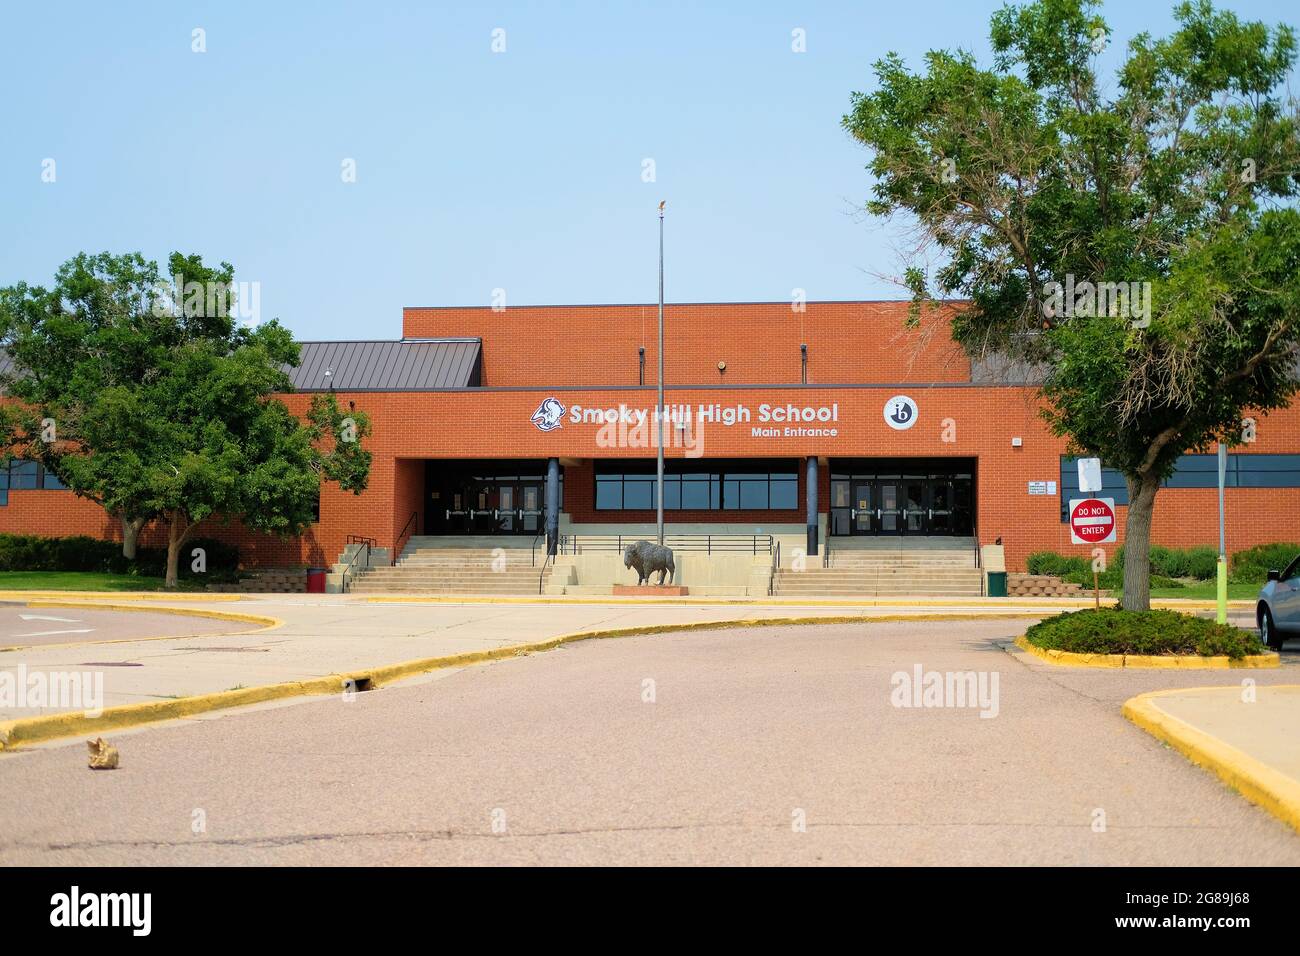 Smoky Hill High School in Aurora, Colorado, part of the Cherry Creek School District, built in 1974, home of the Buffs (mascot: Buffaloes) Stock Photo